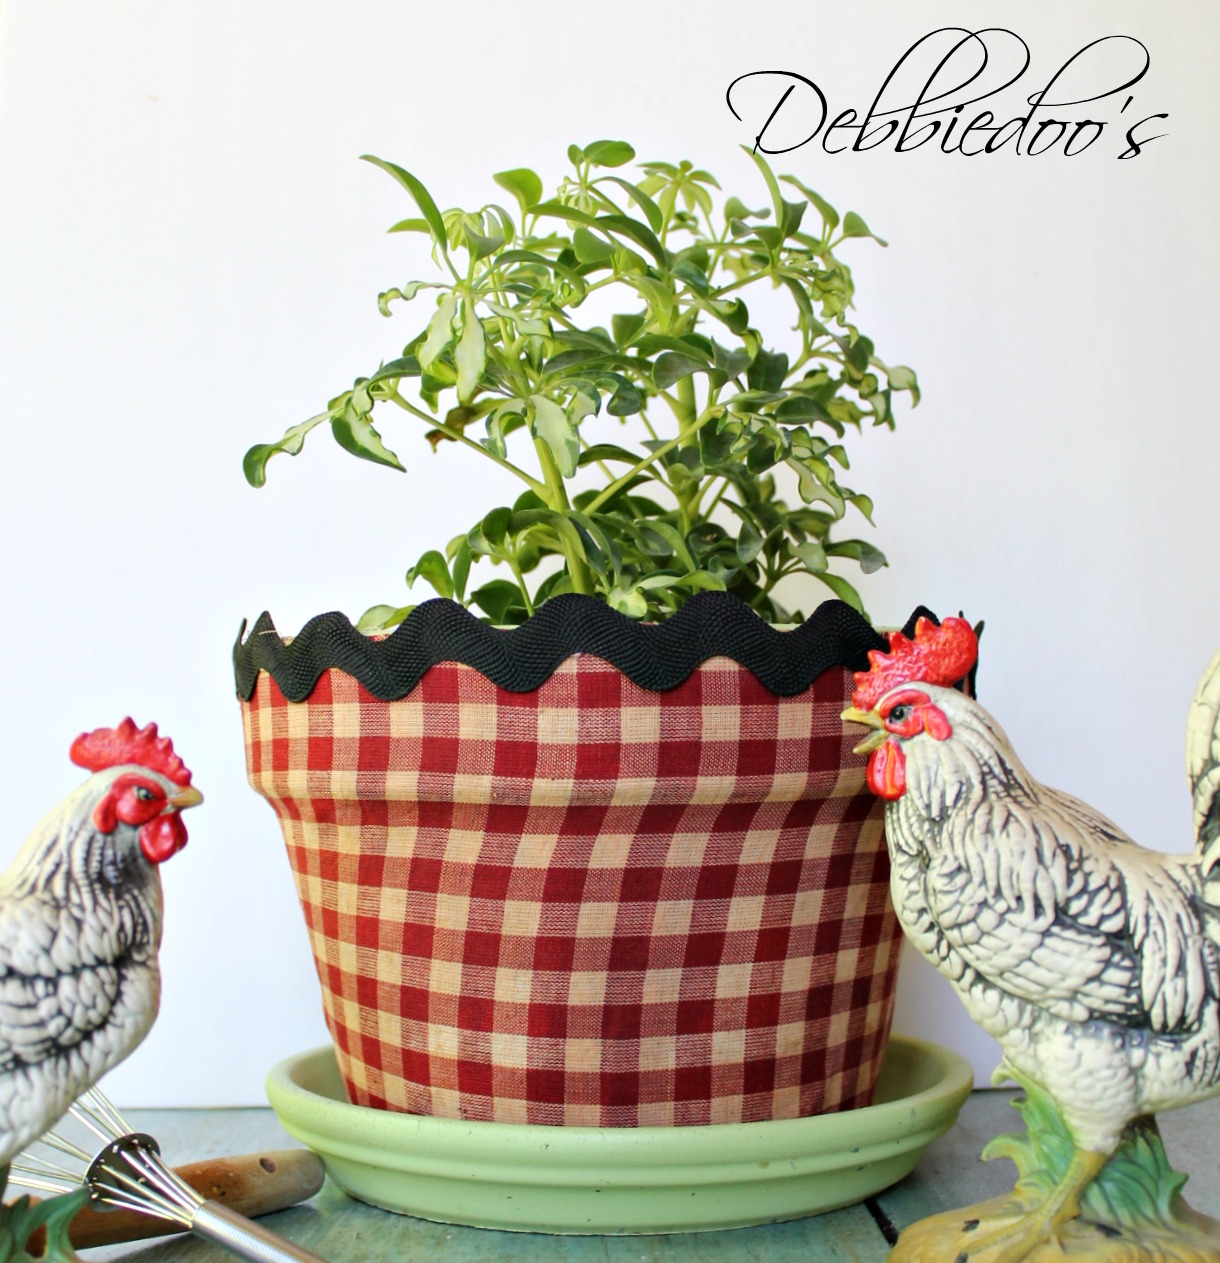 Mod podge terra cotta pots with fabric and a vintage recipe book 021